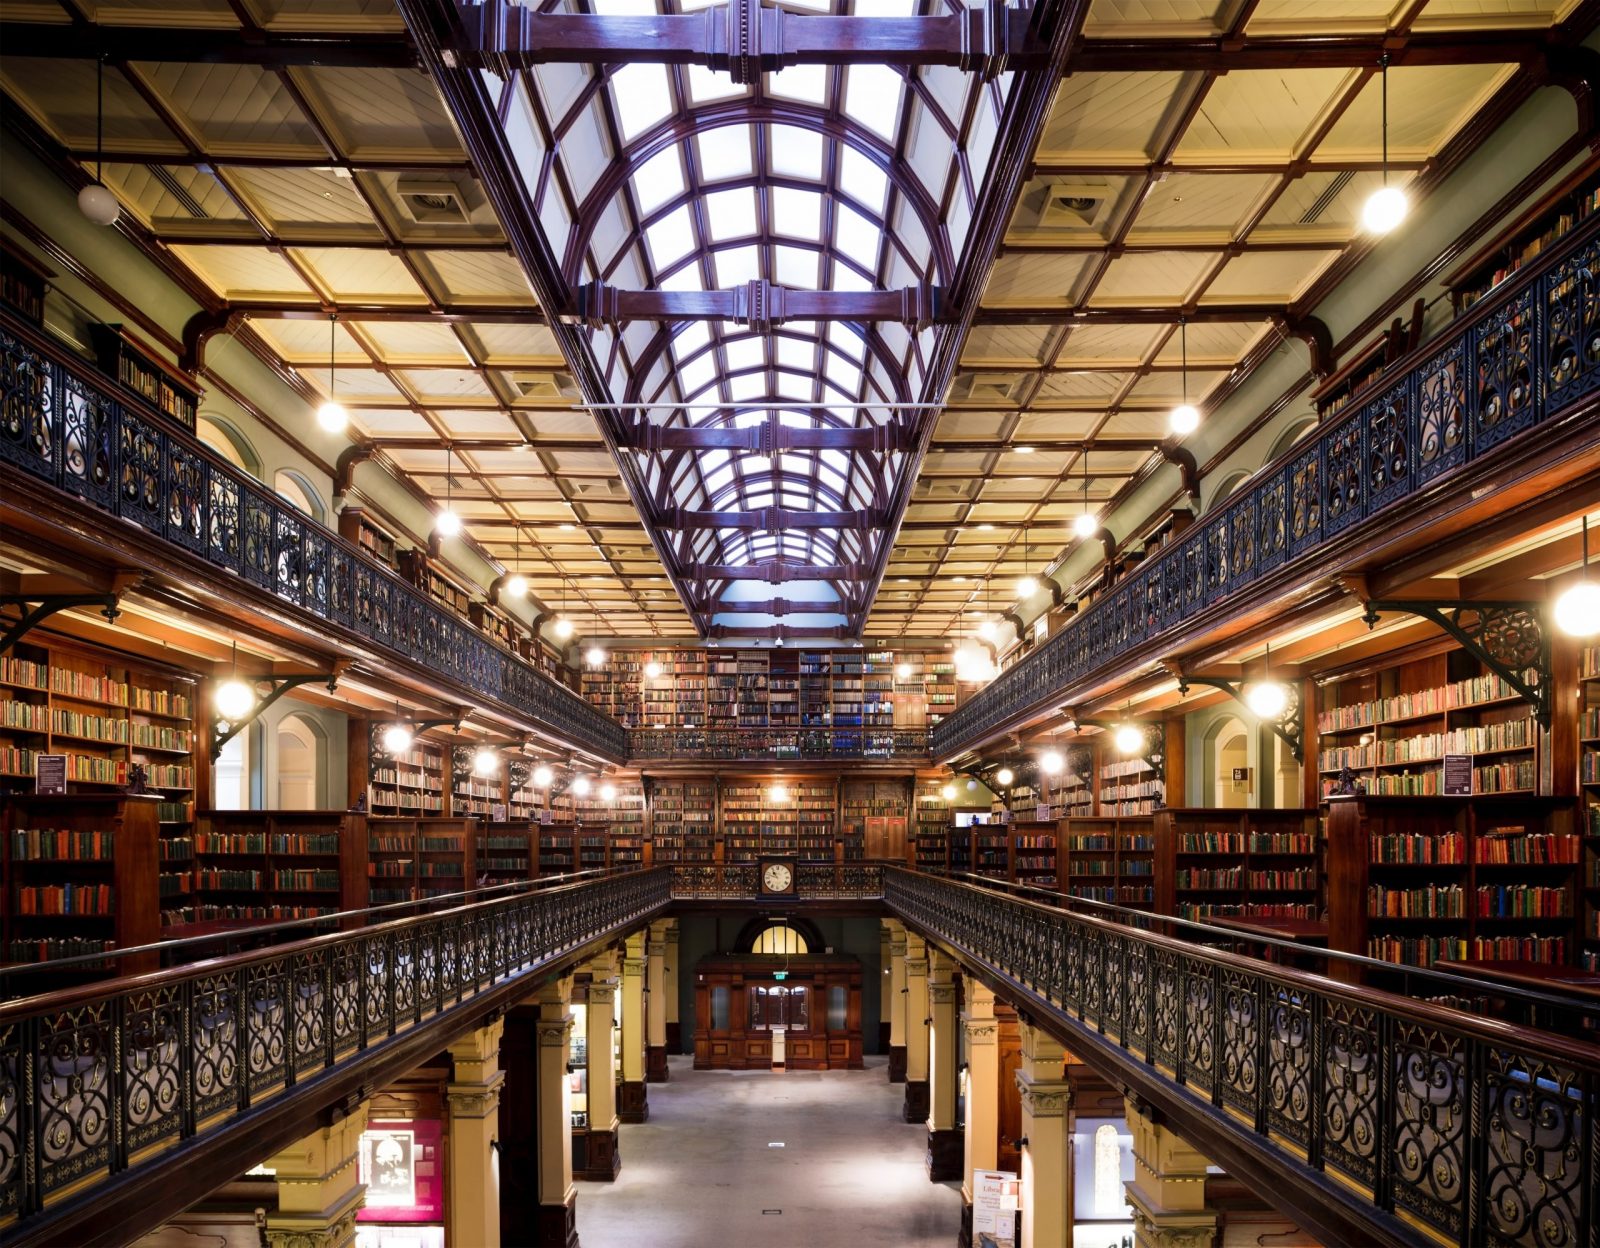 Shifted Panorama image of the second floor of Mortlock Chamber in Adelaide State Library, Australia.